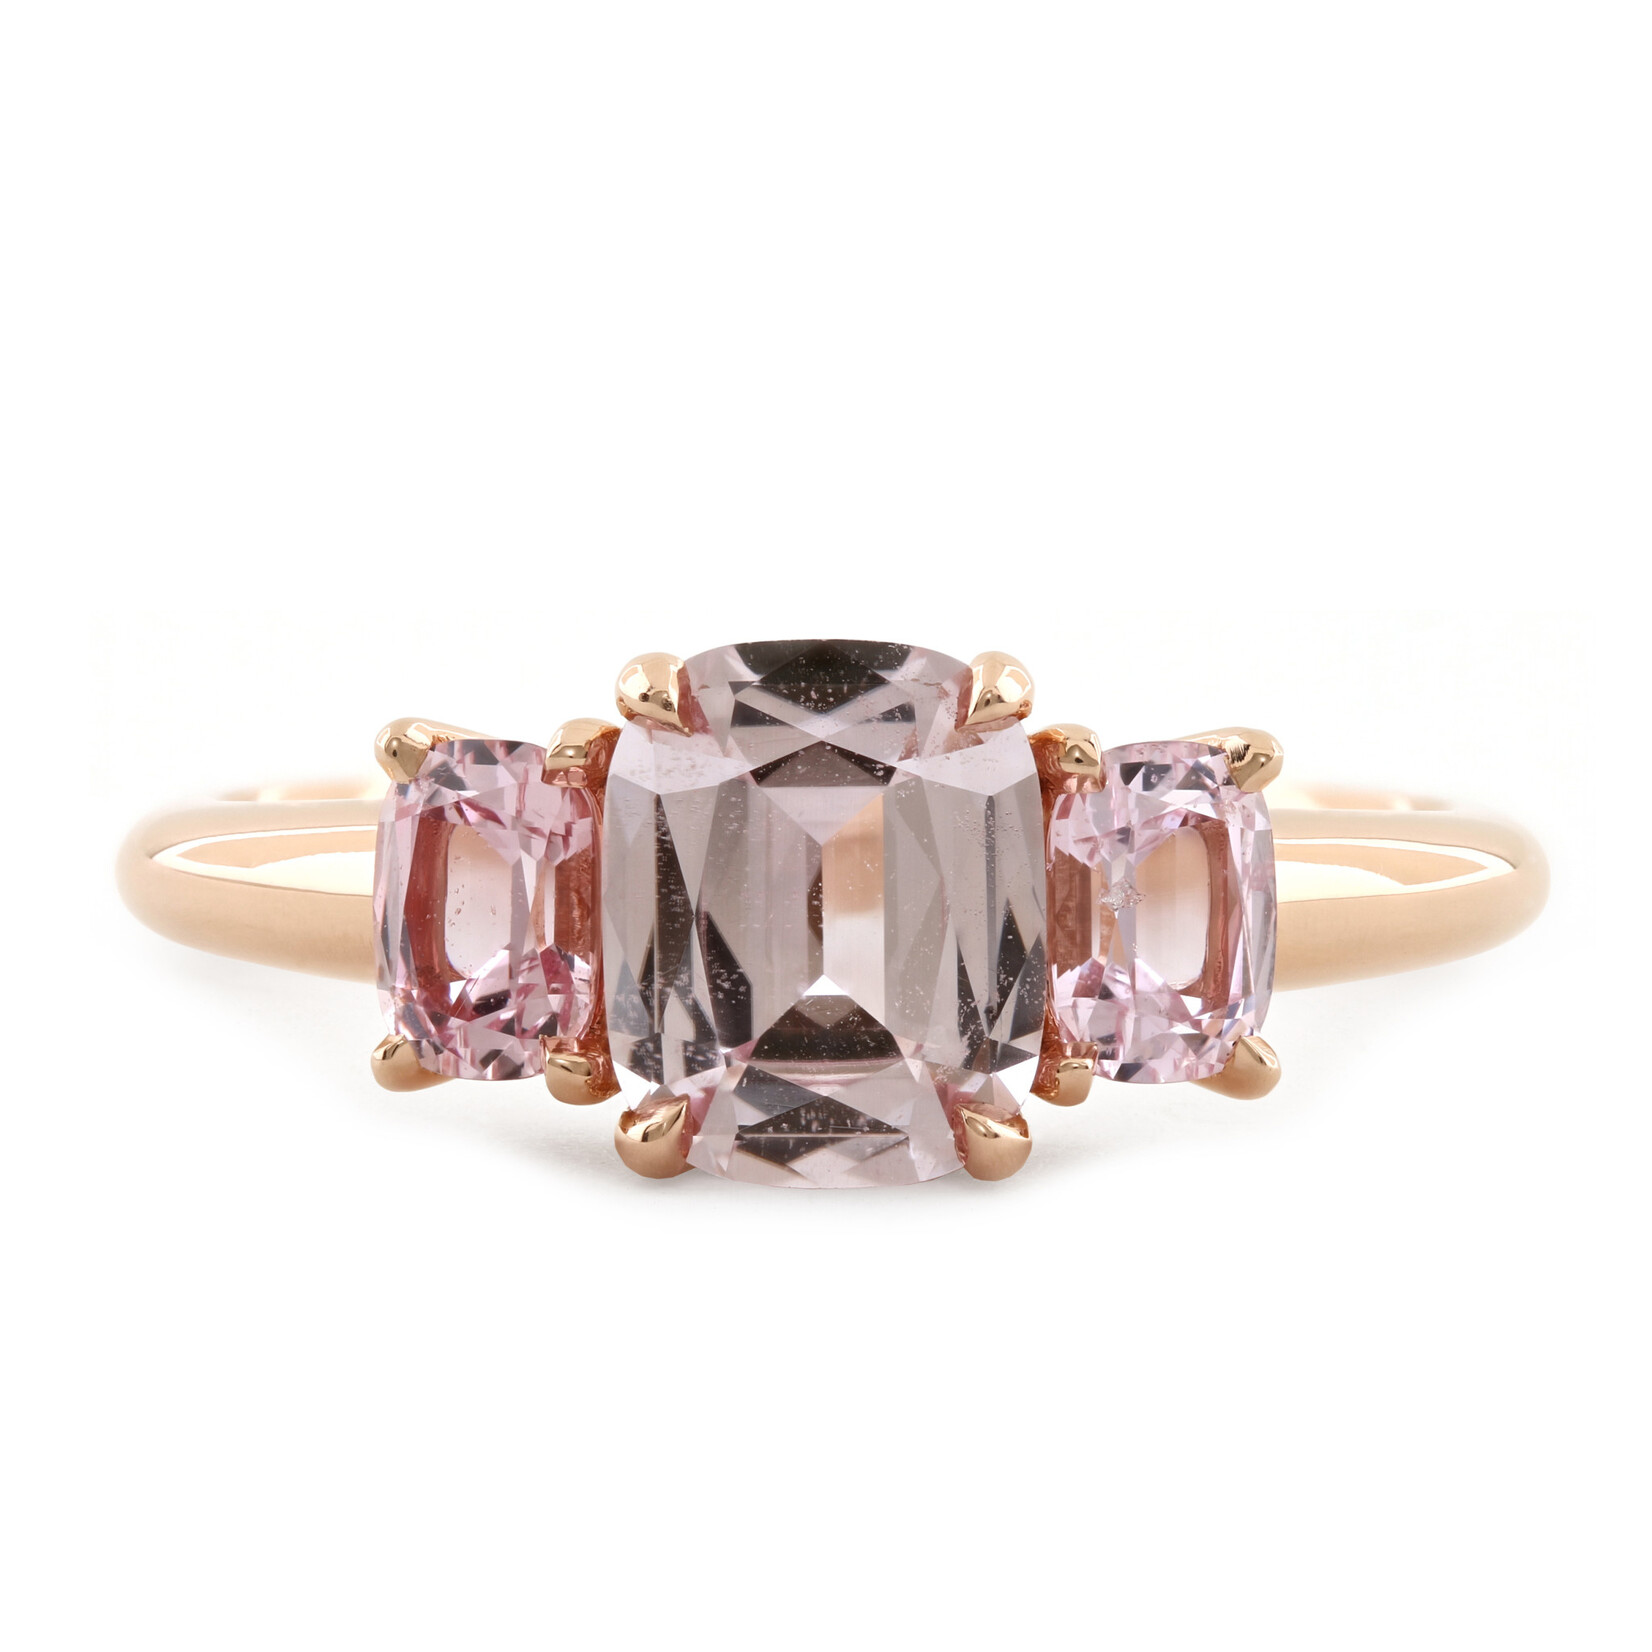 Baxter Moerman Penelope Ring with Peach Sapphires